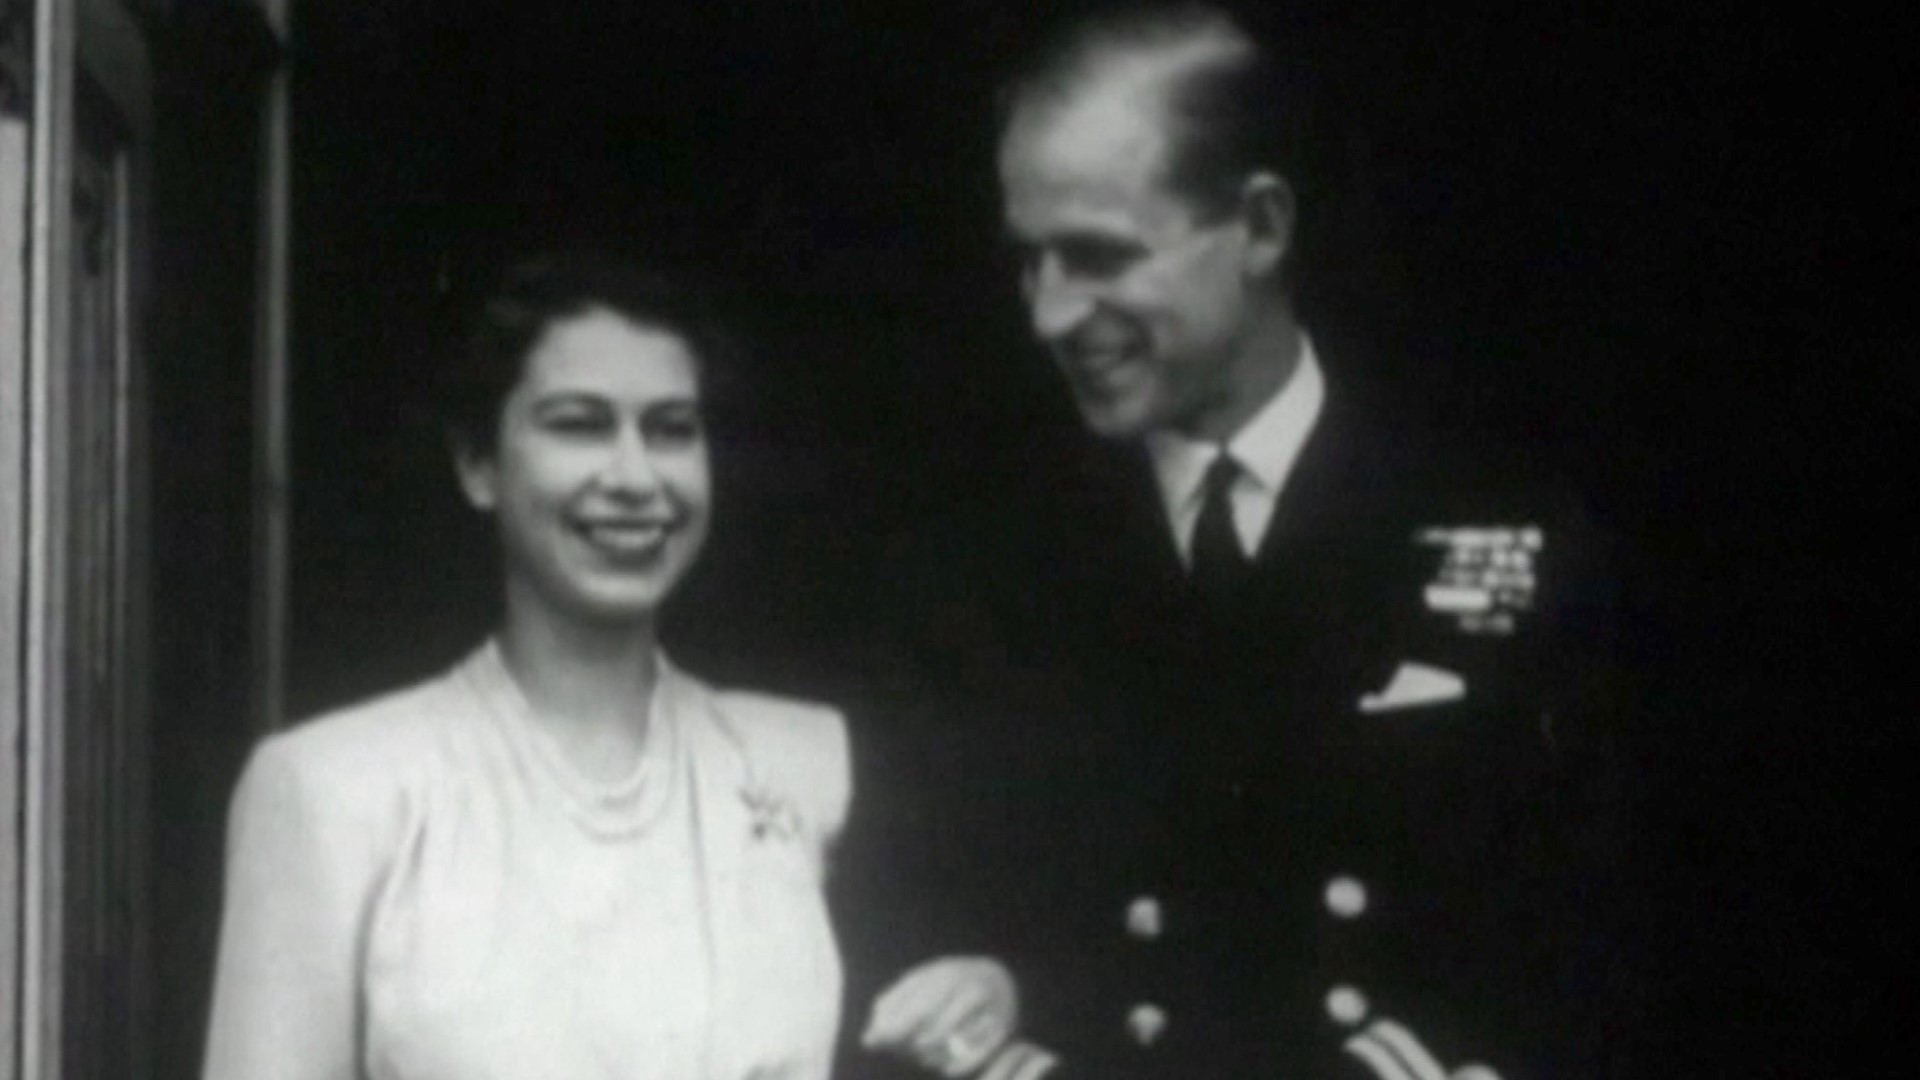 Prince Philip and Queen Elizabeth enjoyed 73 years together, but like any married couple, they had quirks. Buzz60's Keri Lumm reports.